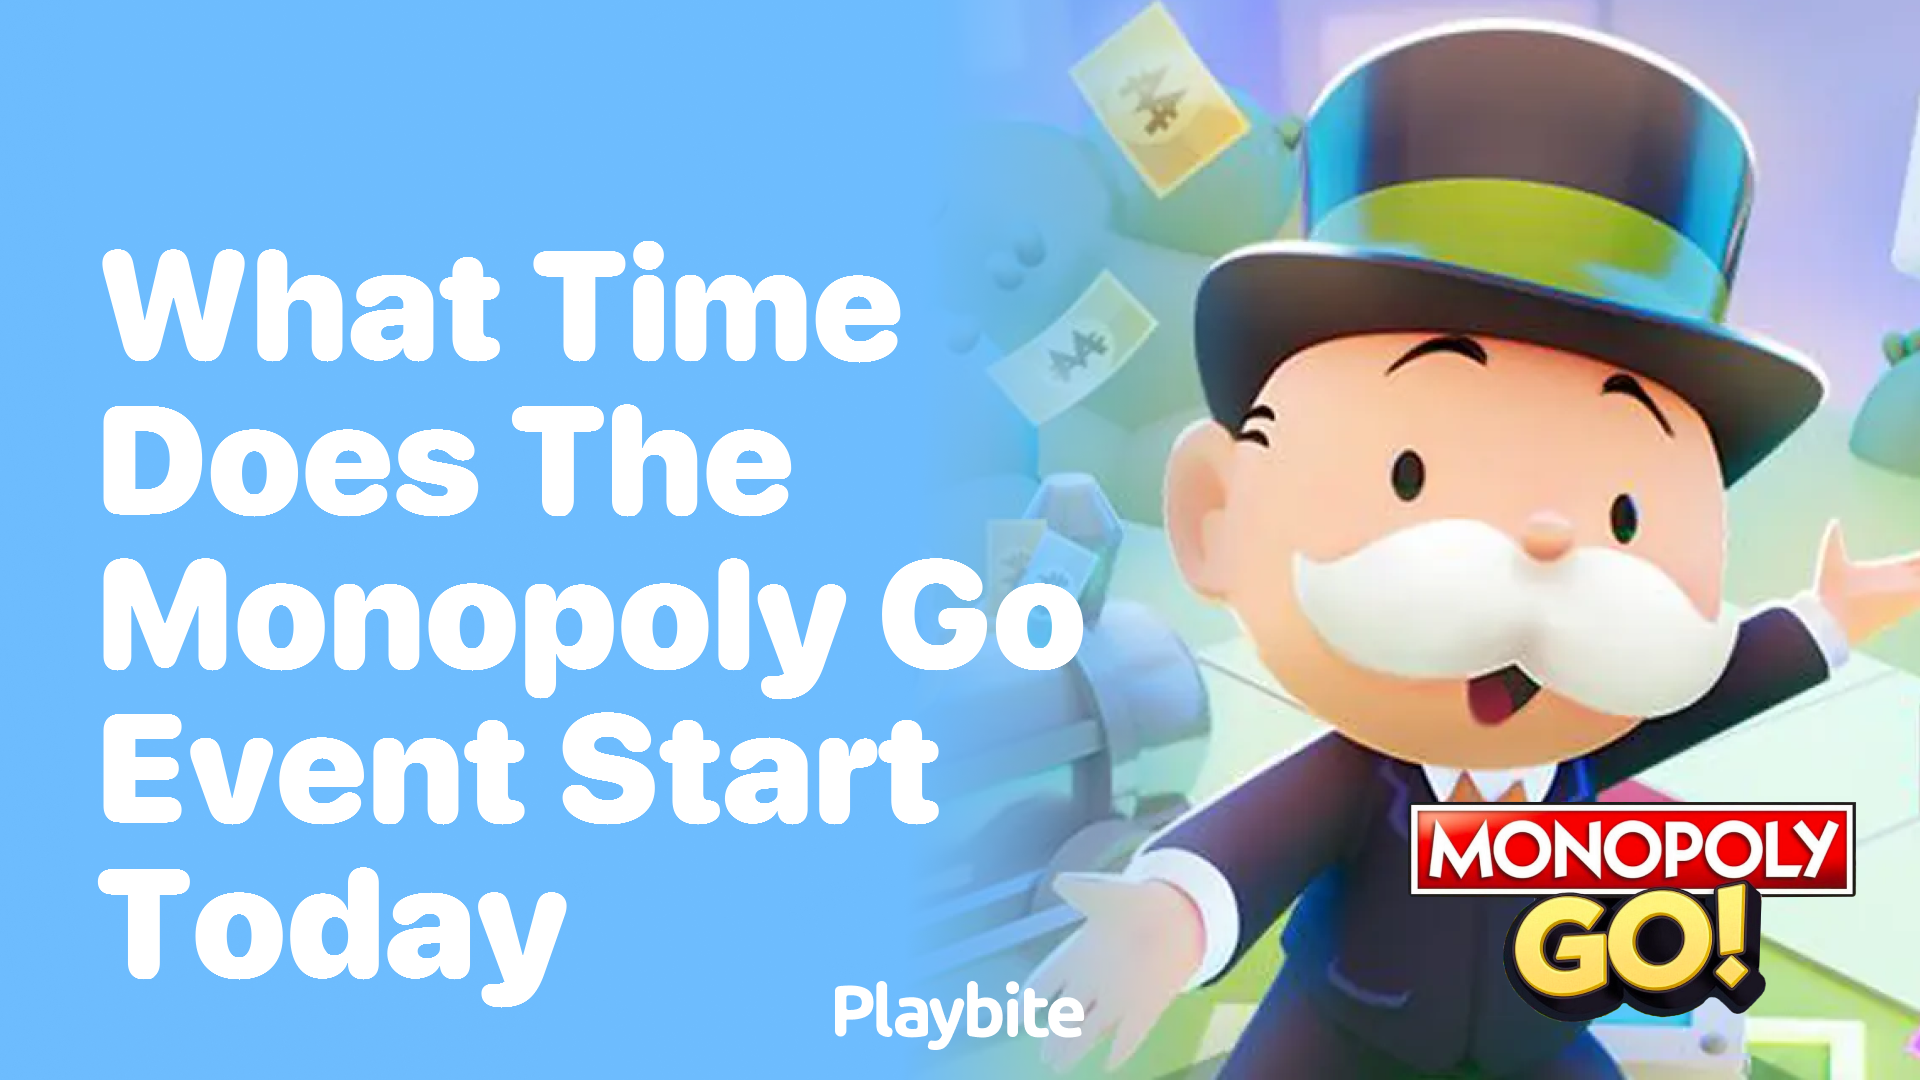 What Time Does the Monopoly Go Event Start Today?